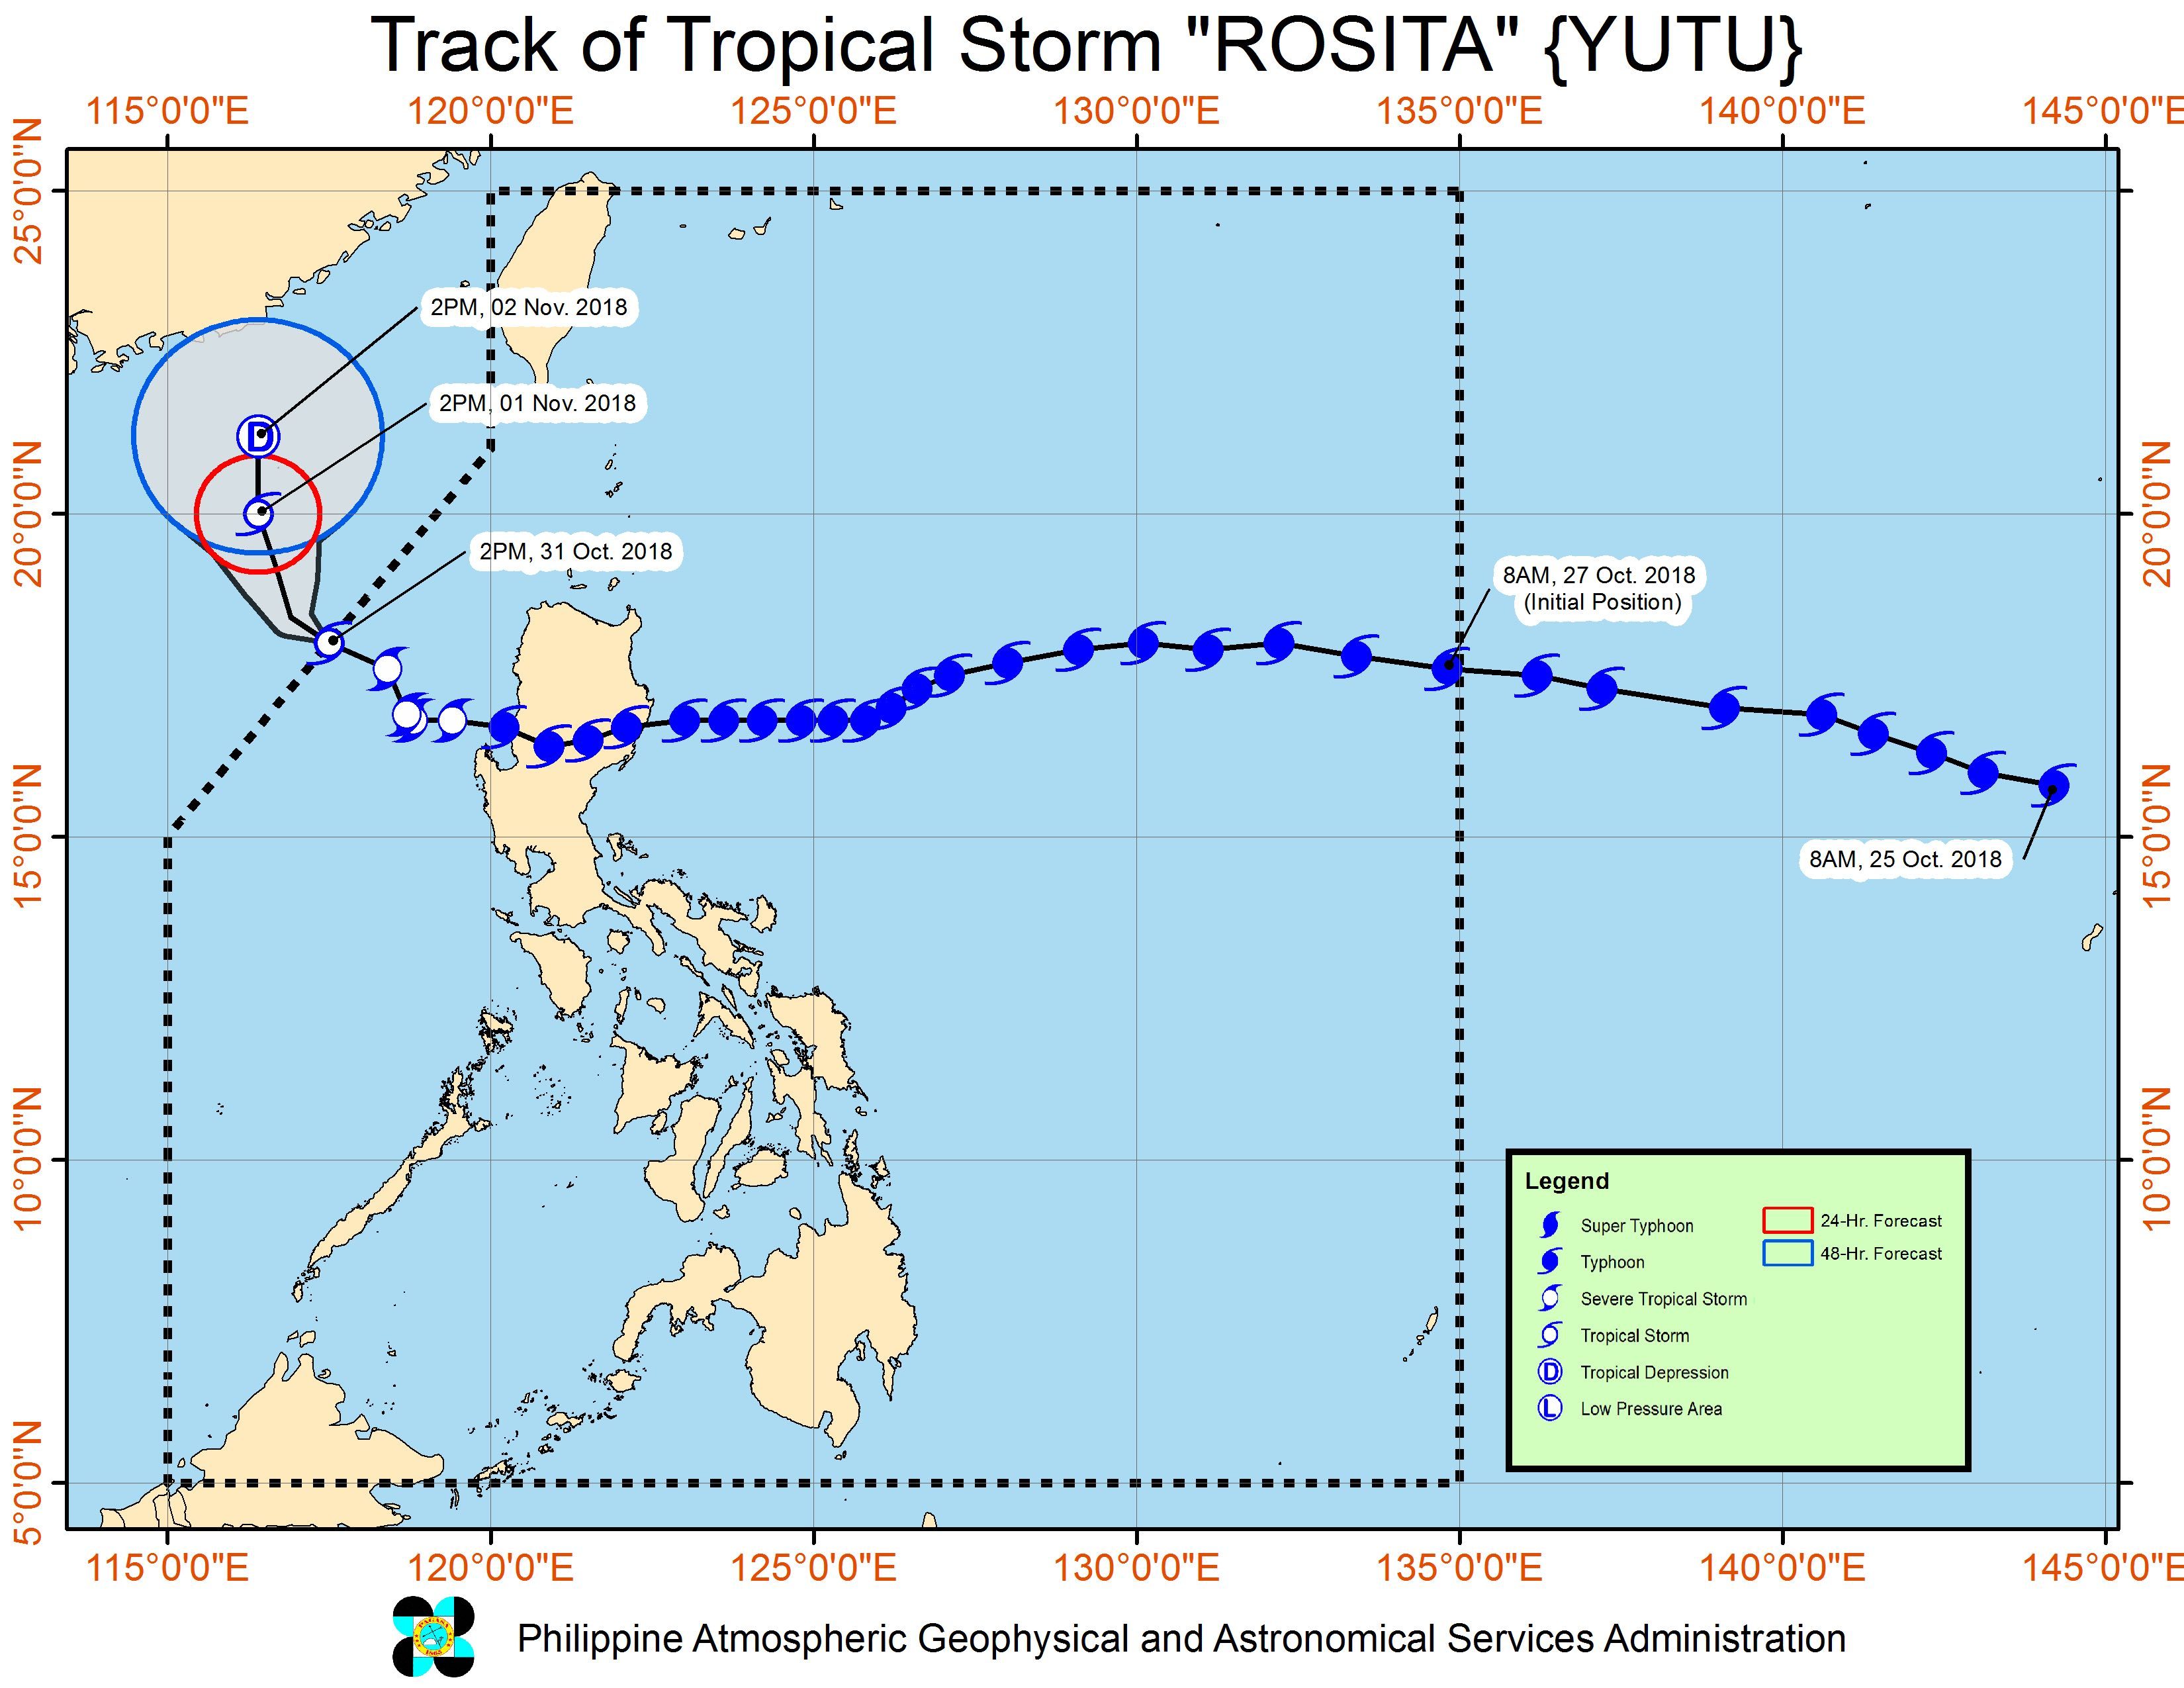 Forecast track of Tropical Storm Rosita (Yutu) as of October 31, 2018, 5 pm. Image from PAGASA 